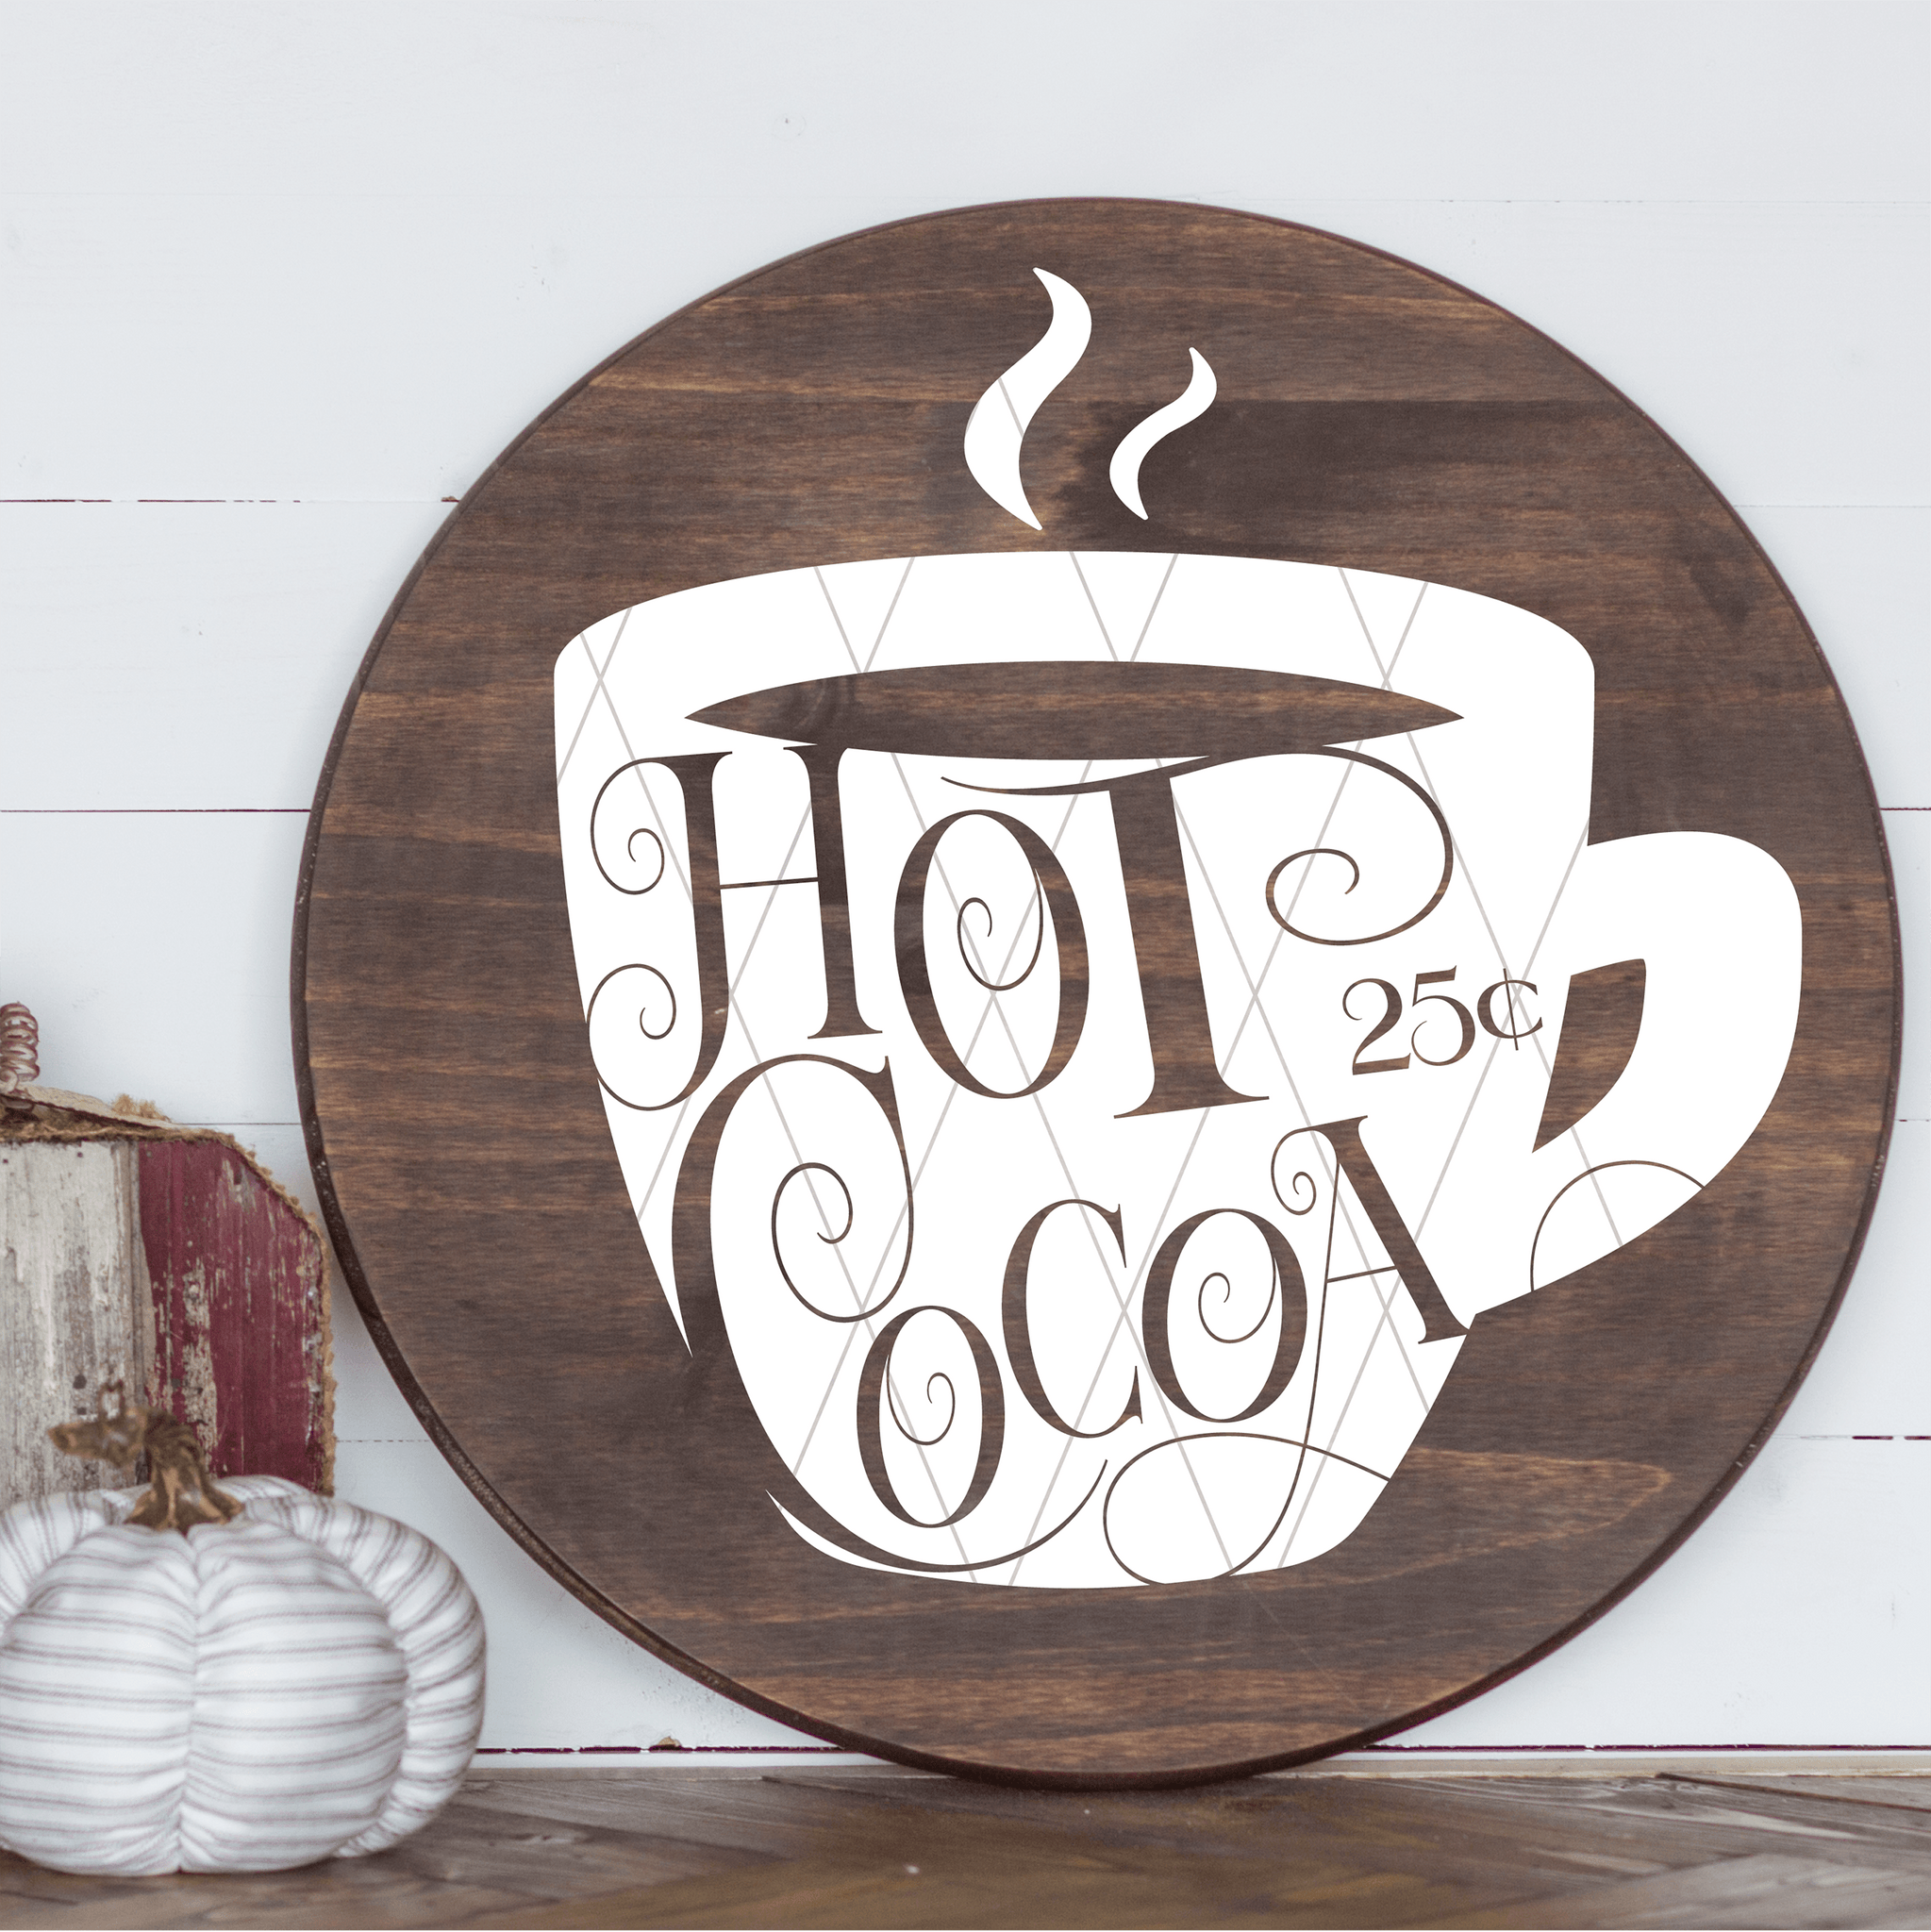 Cutout Hot Cocoa SVG File - Commercial Use SVG Files for Cricut & Silhouette